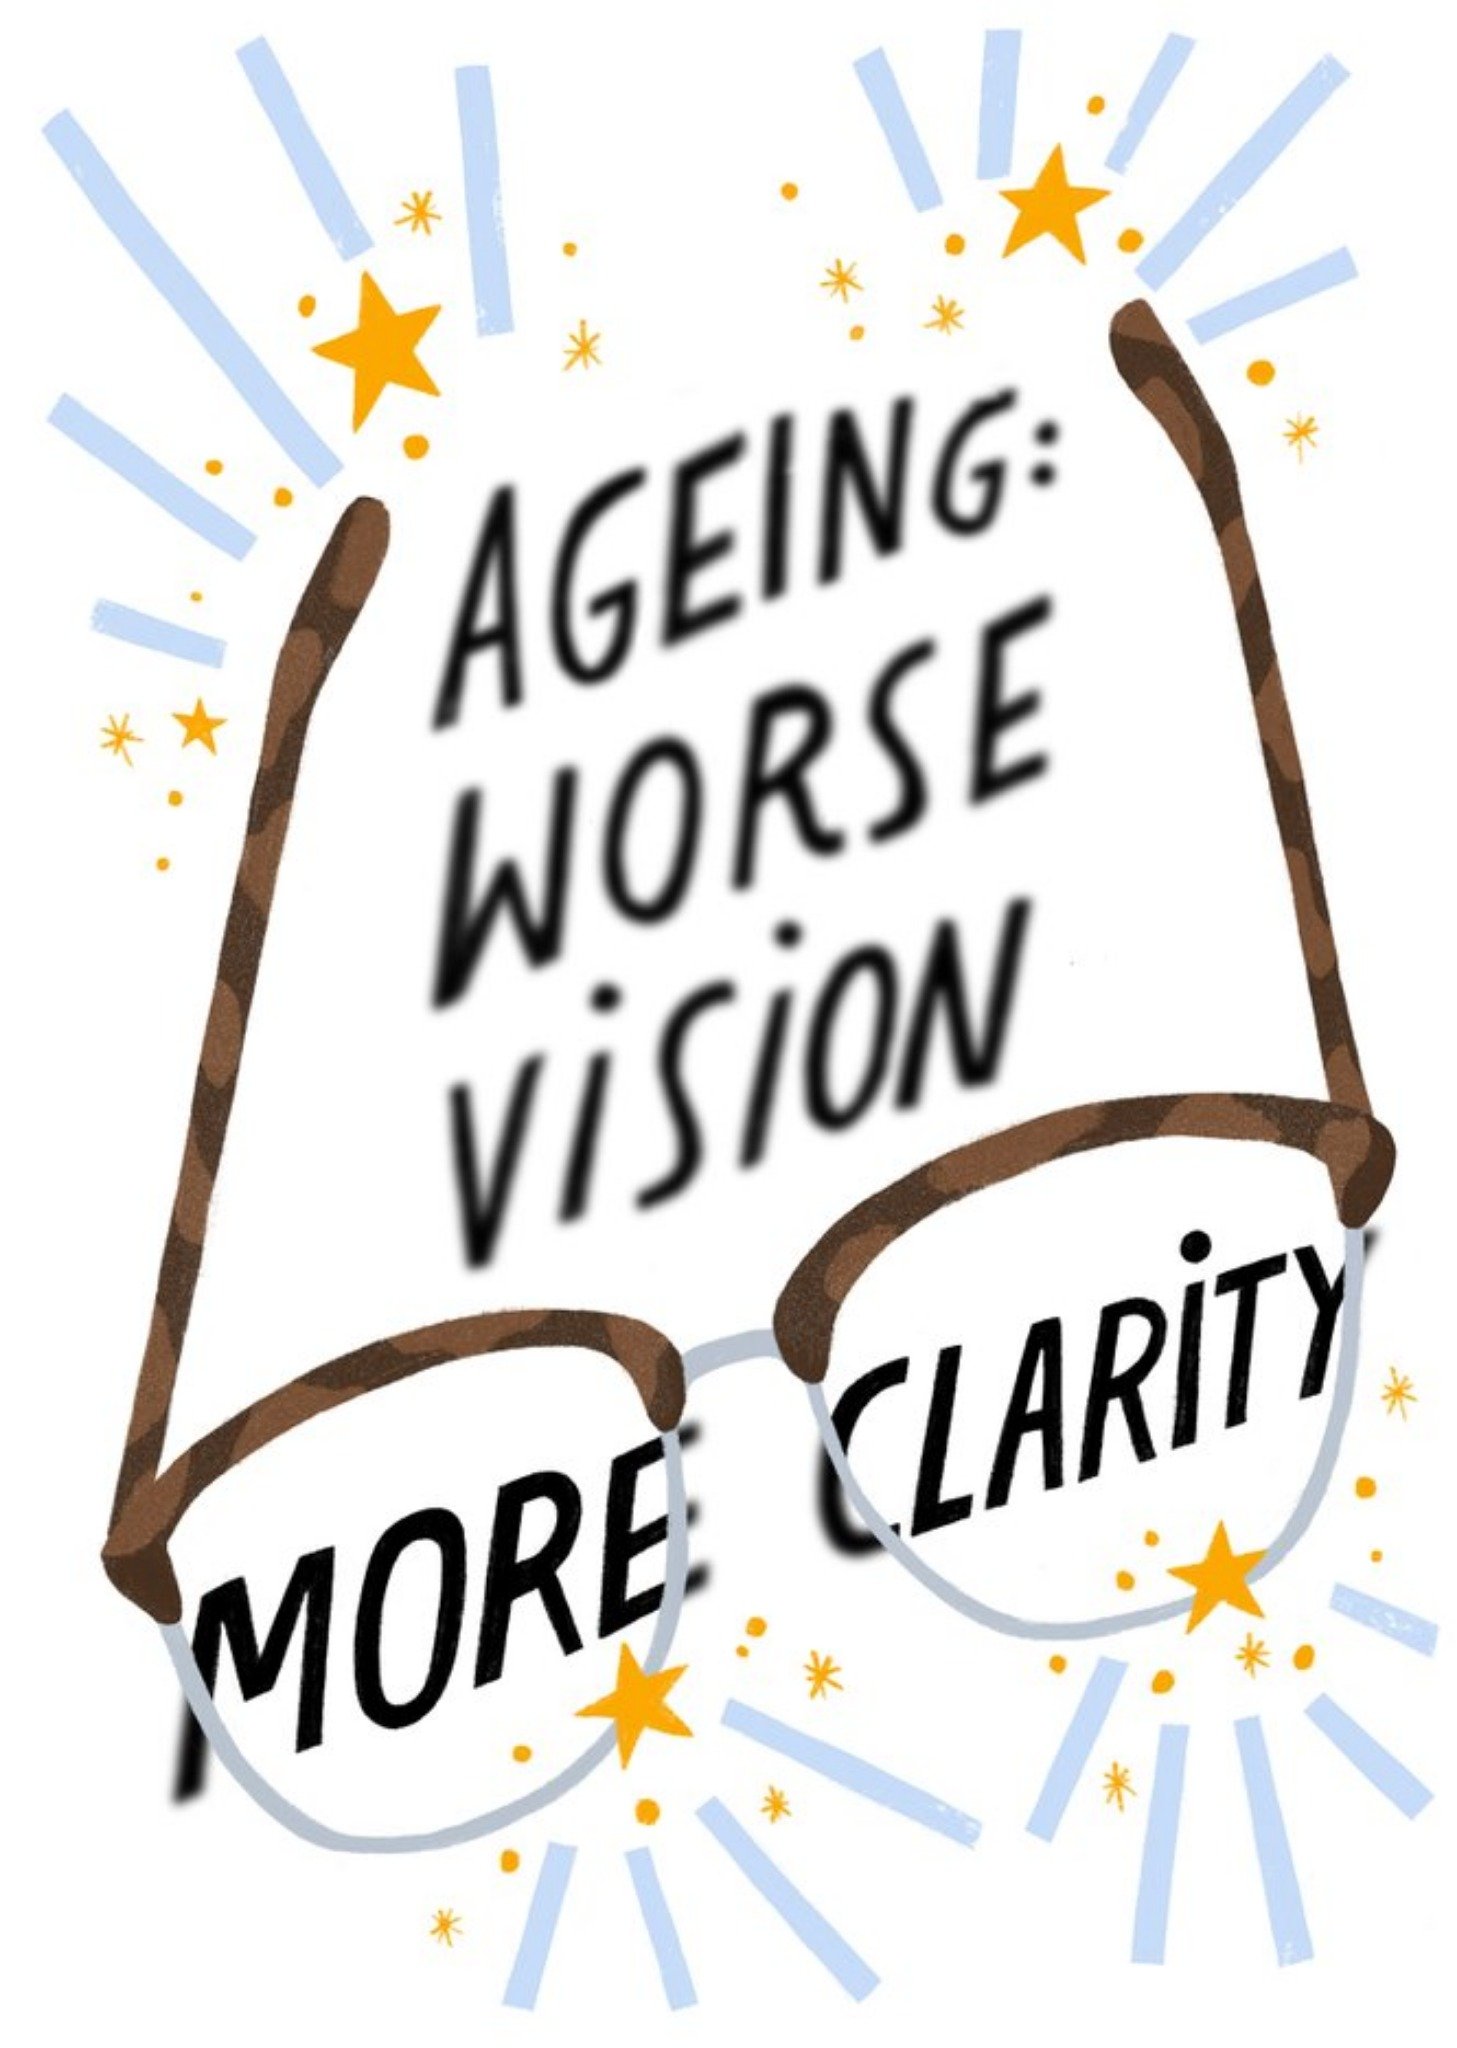 Cardy Club Glasses Aging Ageing Worse Vision More Clarity Card Ecard